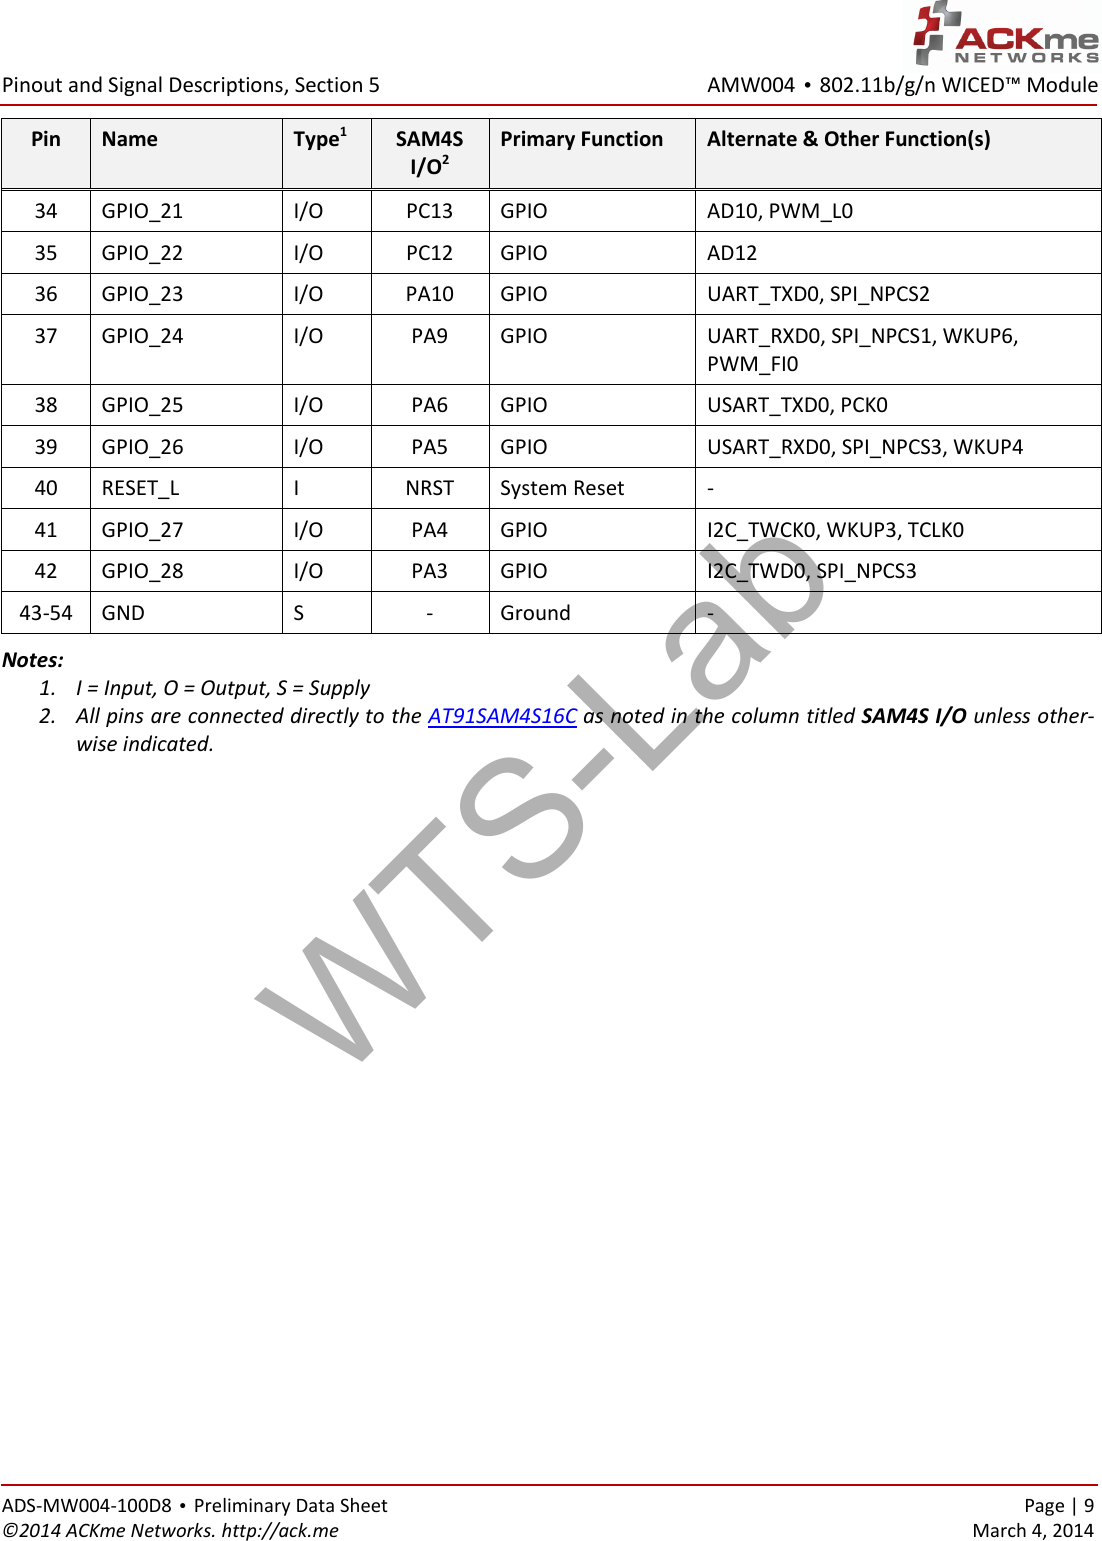 AMW004 • 802.11b/g/n WICED™ Module  Pinout and Signal Descriptions, Section 5 ADS-MW004-100D8 • Preliminary Data Sheet    Page | 9 ©2014 ACKme Networks. http://ack.me    March 4, 2014 Pin Name Type1 SAM4S I/O2 Primary Function  Alternate &amp; Other Function(s) 34 GPIO_21 I/O PC13 GPIO AD10, PWM_L0 35 GPIO_22 I/O PC12 GPIO AD12 36 GPIO_23 I/O PA10 GPIO UART_TXD0, SPI_NPCS2 37 GPIO_24 I/O PA9 GPIO UART_RXD0, SPI_NPCS1, WKUP6, PWM_FI0 38 GPIO_25 I/O PA6 GPIO USART_TXD0, PCK0 39 GPIO_26 I/O PA5 GPIO USART_RXD0, SPI_NPCS3, WKUP4 40 RESET_L I NRST System Reset - 41 GPIO_27 I/O PA4 GPIO I2C_TWCK0, WKUP3, TCLK0 42 GPIO_28 I/O PA3 GPIO I2C_TWD0, SPI_NPCS3 43-54 GND S - Ground - Notes: 1. I = Input, O = Output, S = Supply 2. All pins are connected directly to the AT91SAM4S16C as noted in the column titled SAM4S I/O unless other-wise indicated.     WTS-Lab